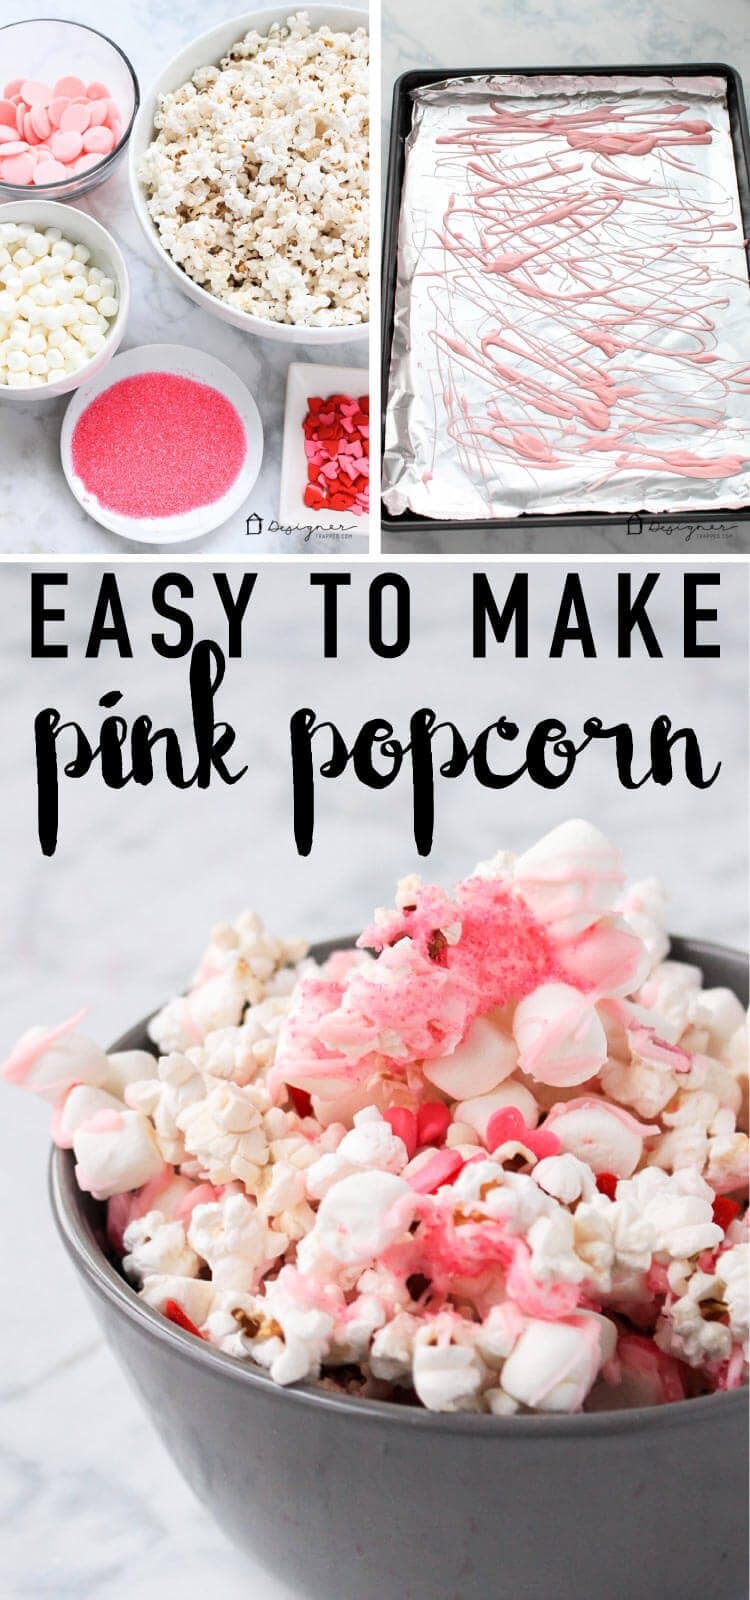 OMG! Love this pretty and super easy pink popcorn for Valentine's Day. It looks like a kid-friendly recipe that my girls will love making and they can even share it with their friends as a Valentine's Day treat to go with their Valentine's Day cards at school!